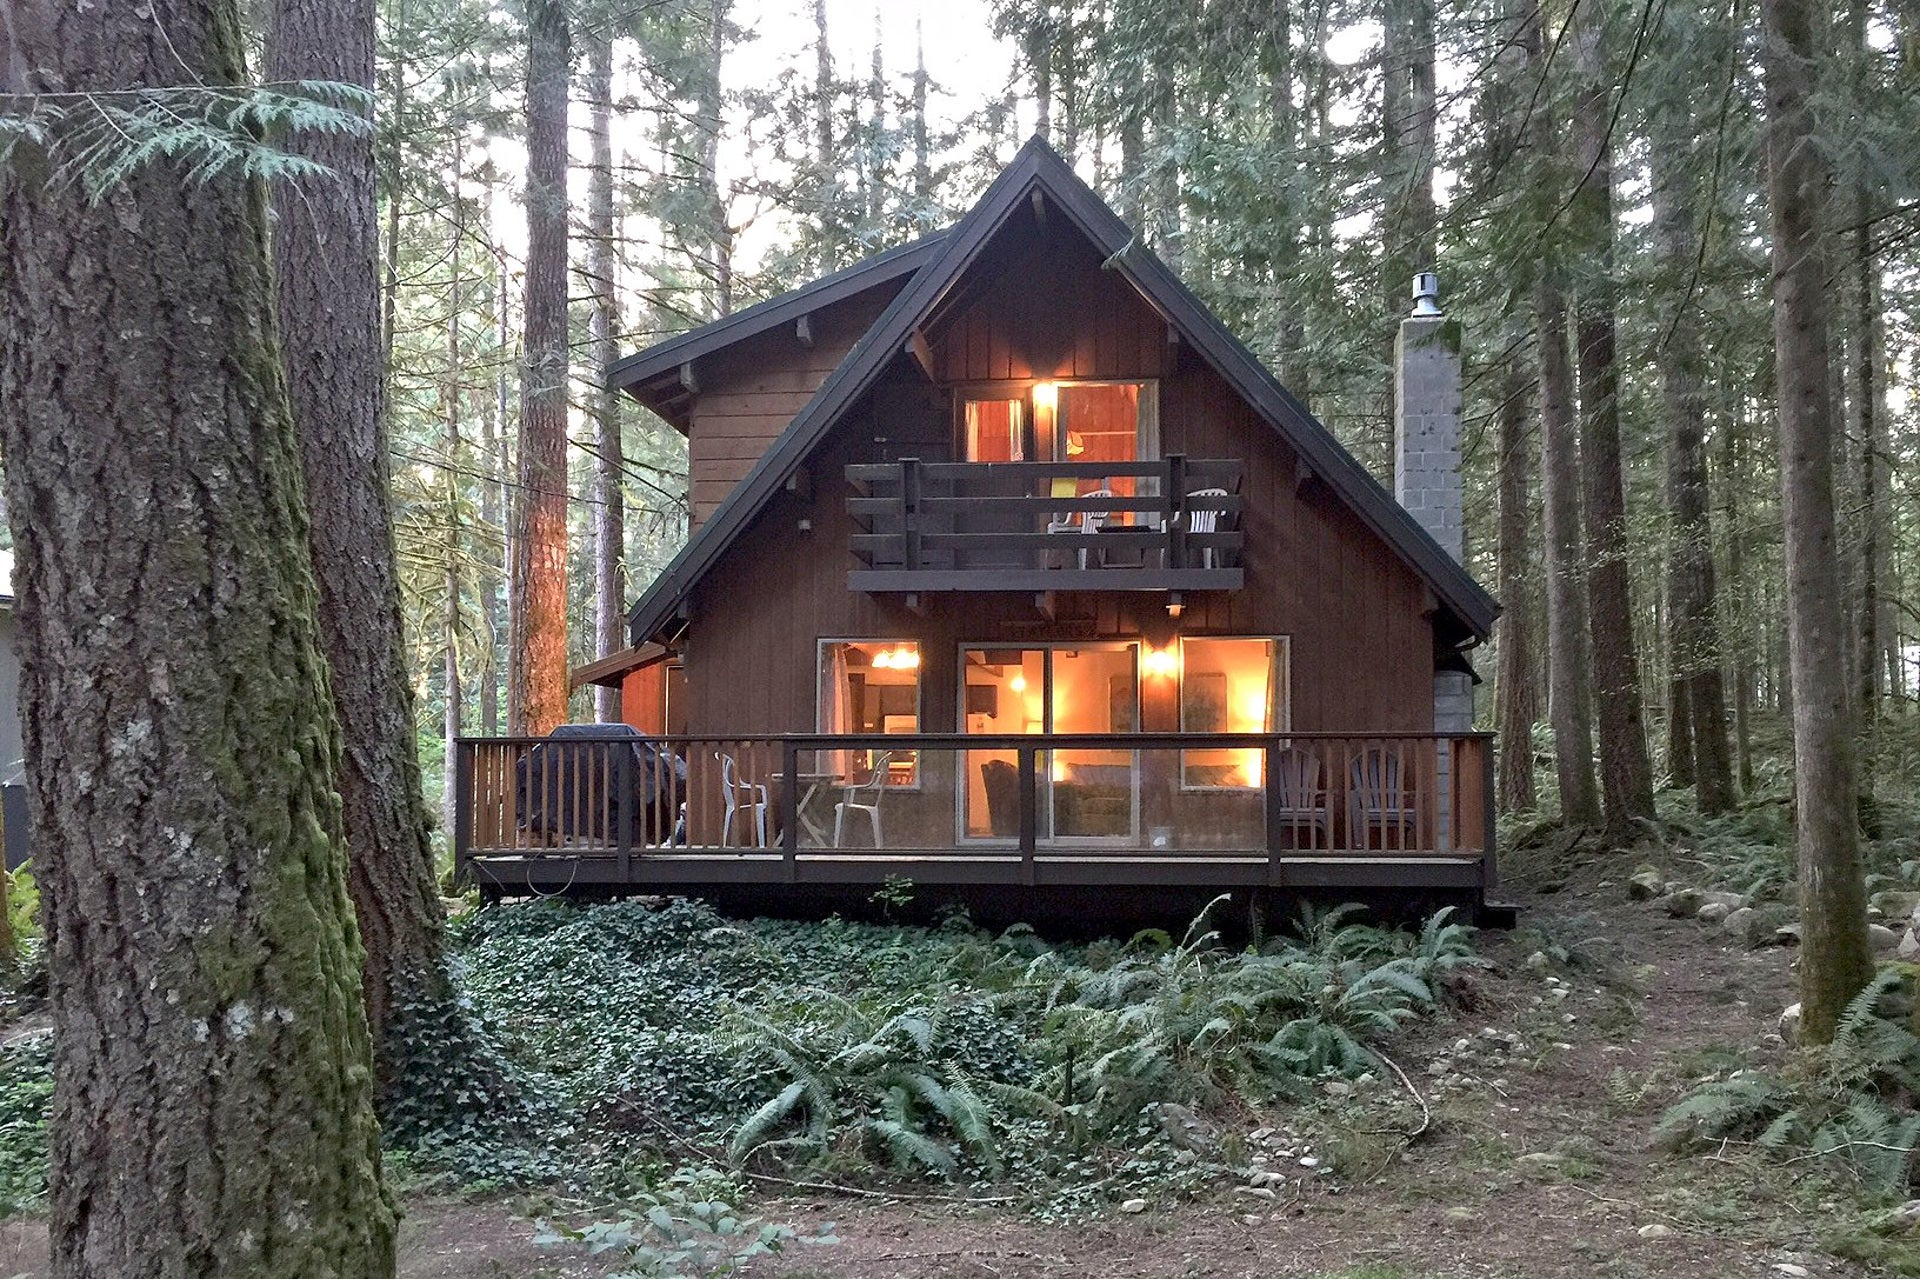 Camper submitted image from Mt. Baker Lodging - Cabin #27 - Pets Ok - Fireplace - Sleeps 10 - 2